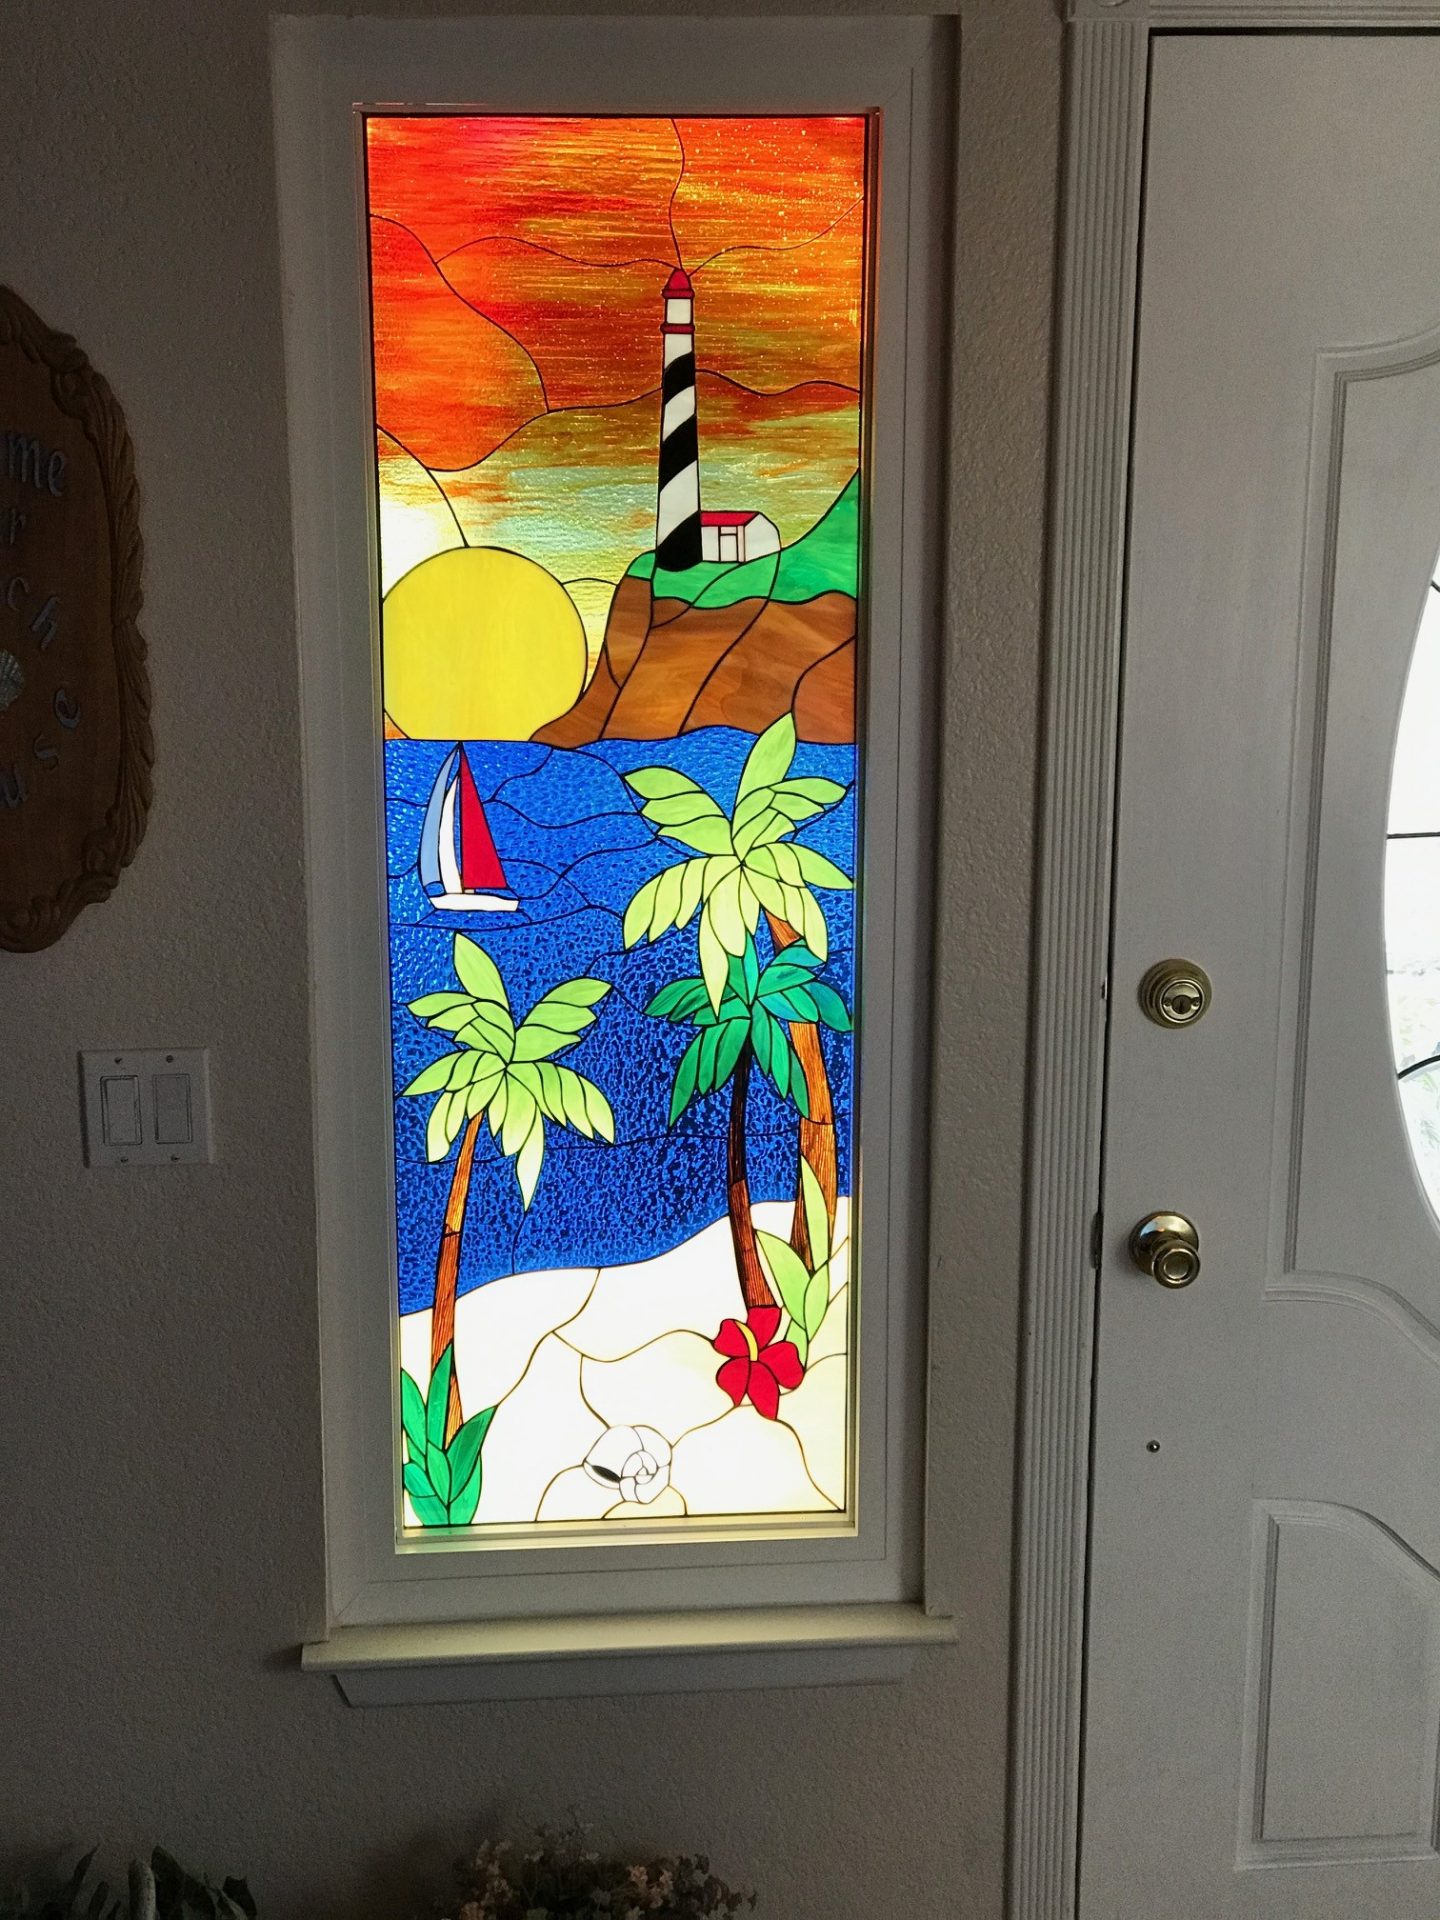 Lighthouse, palm tree and sunset stained glass side lite window added beauty and natural light